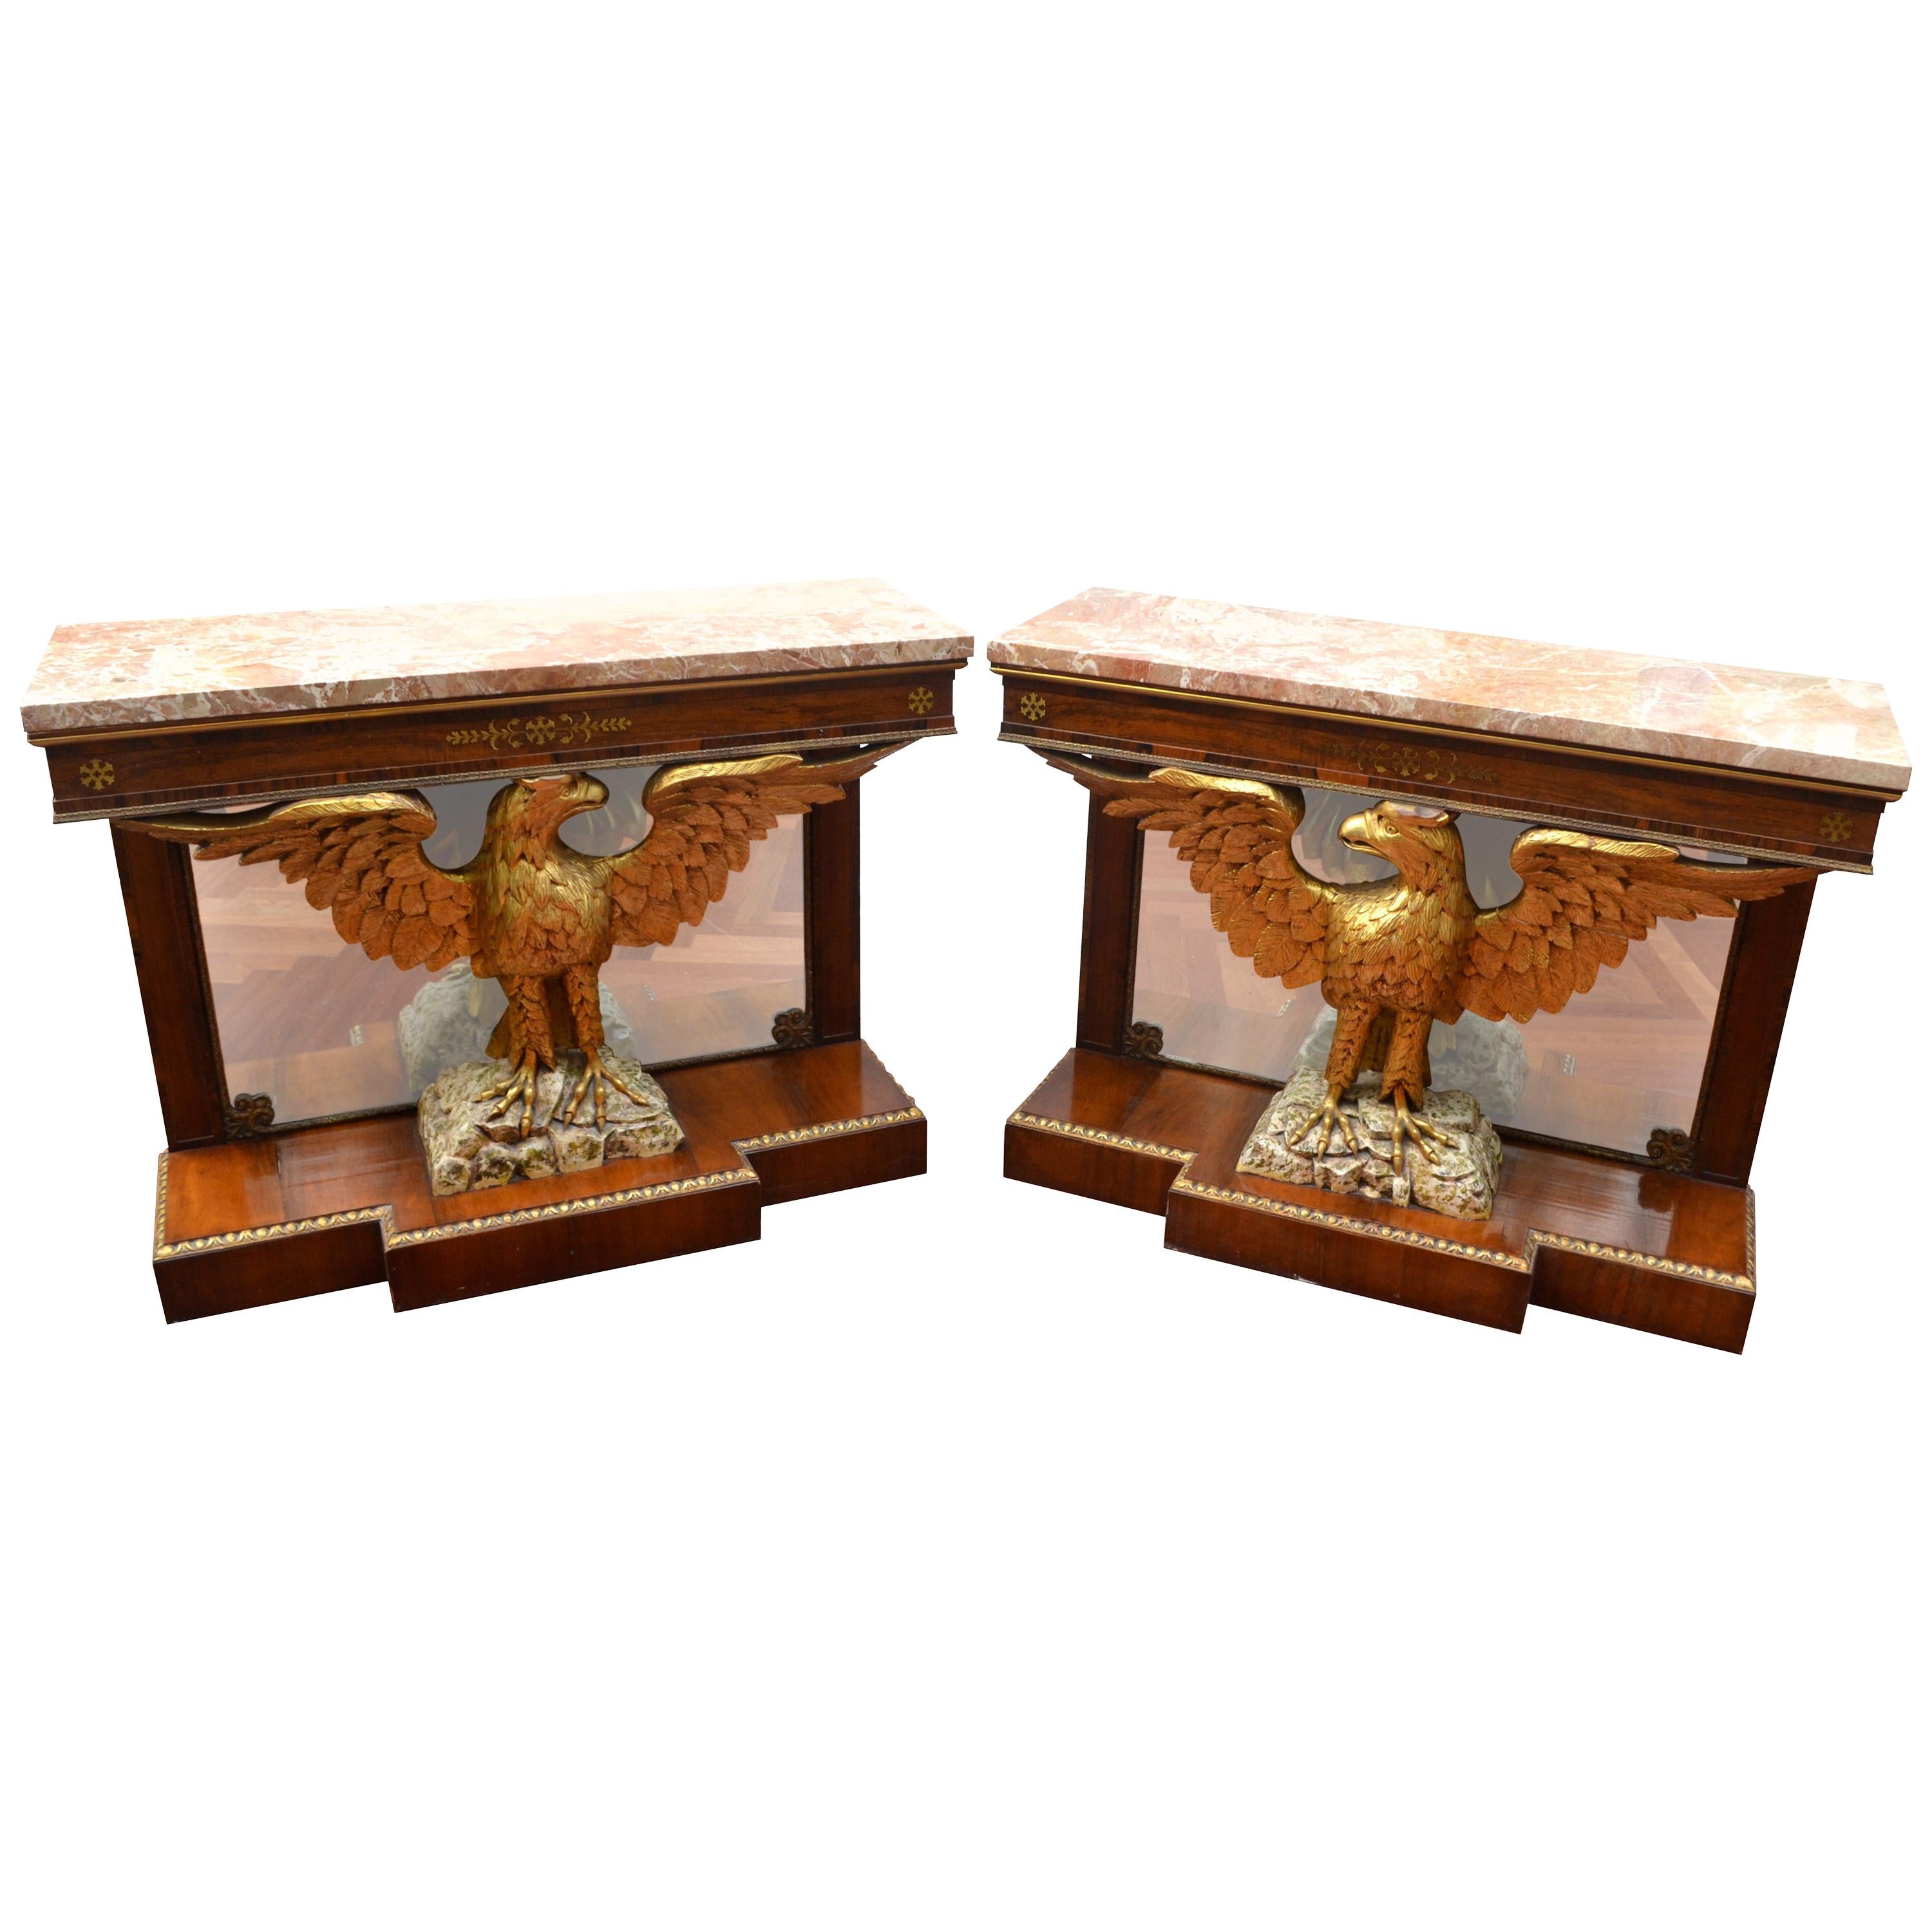 Pair of  Regency Revival Mahogany and Giltwood Eagle Pier Consoles